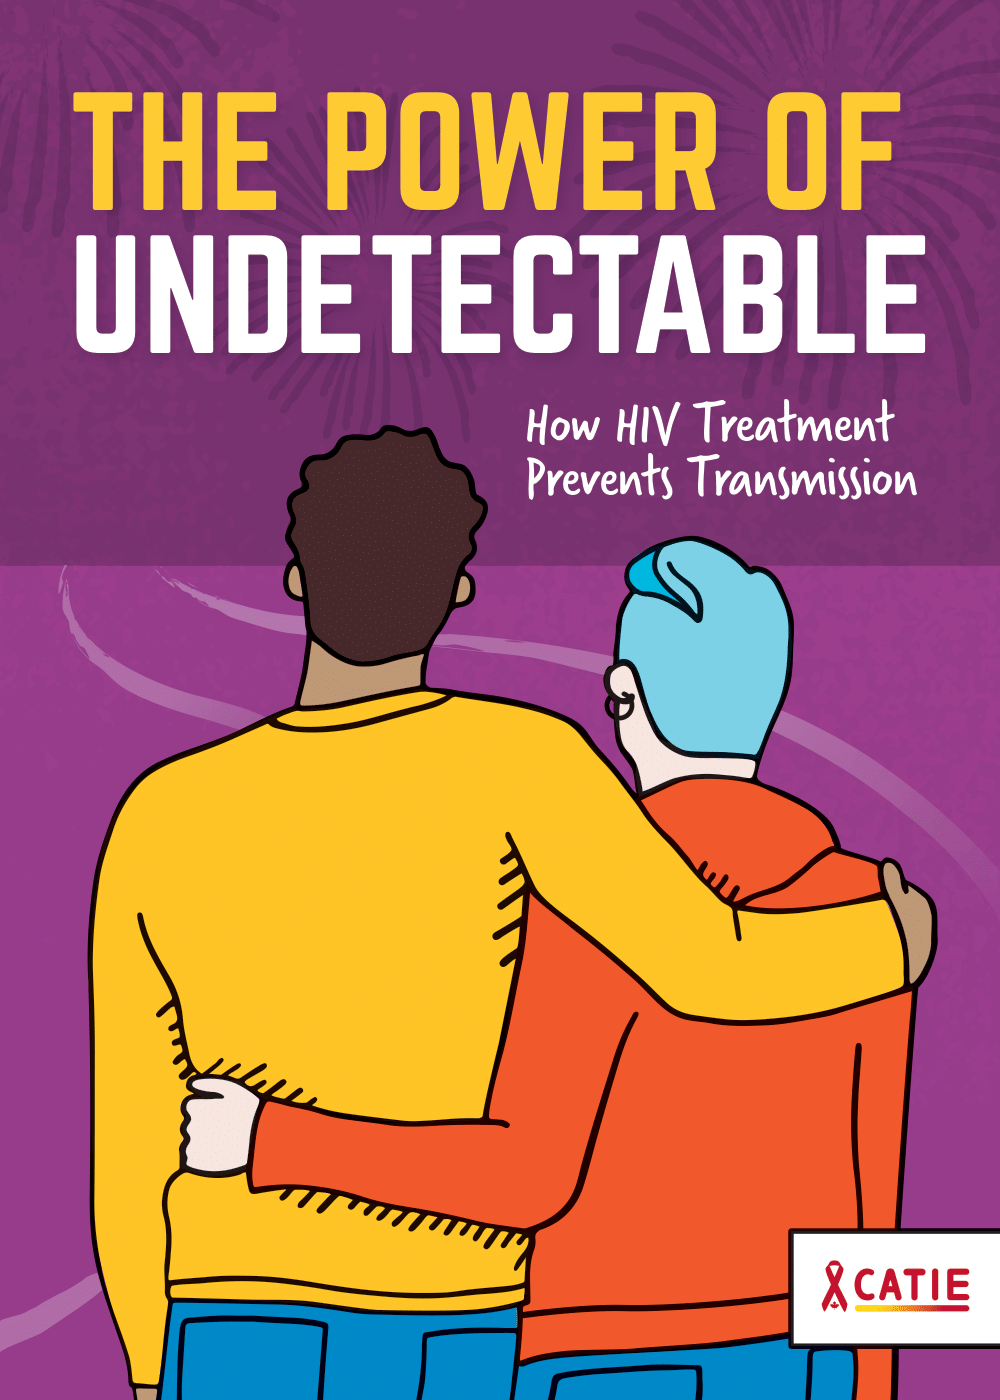 The Power of Undetectable: What you need to know about HIV treatment as prevention